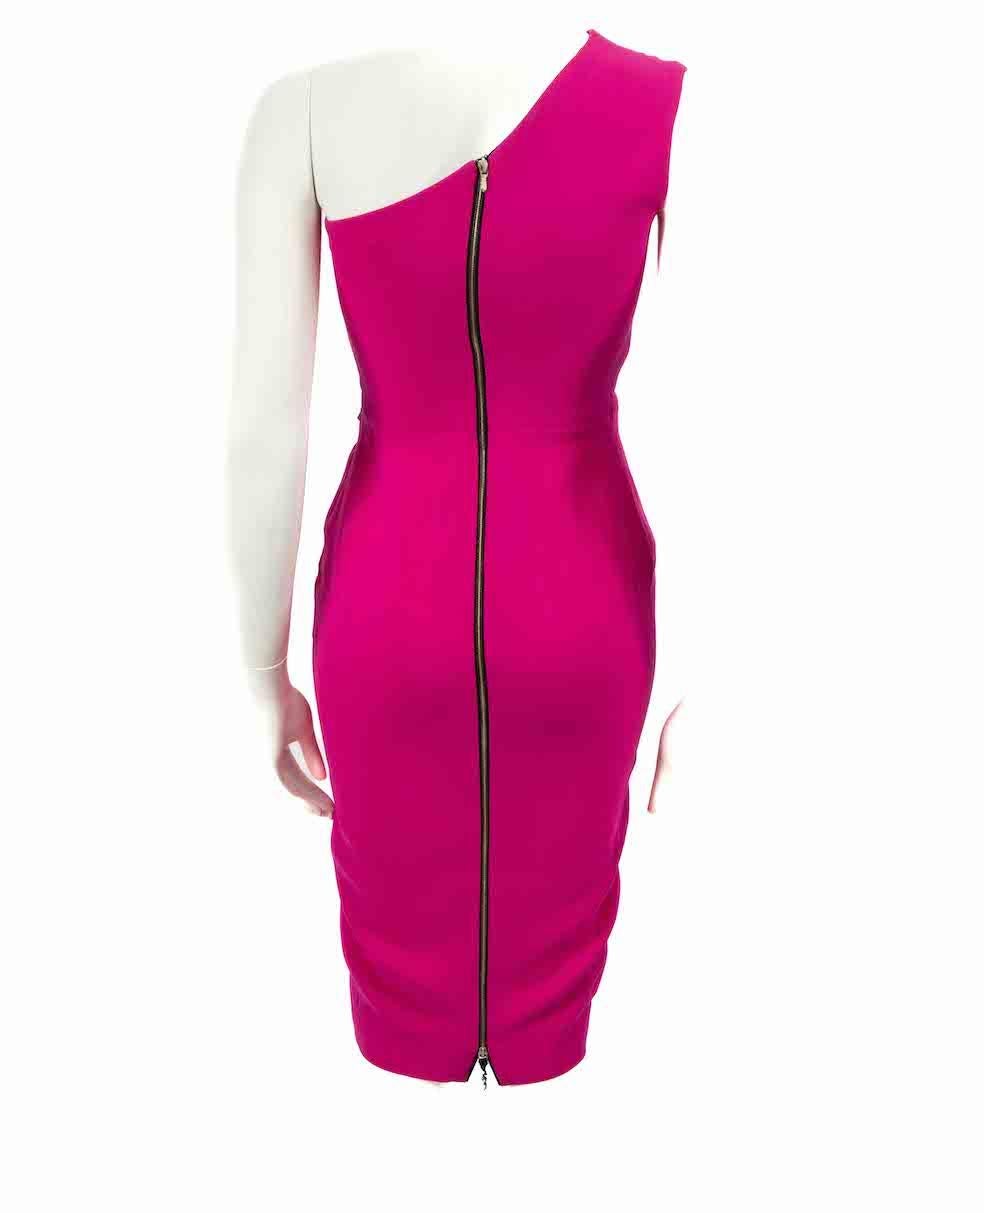 Victoria Beckham Pink Silk One Shoulder Midi Dress Size XS In Good Condition For Sale In London, GB